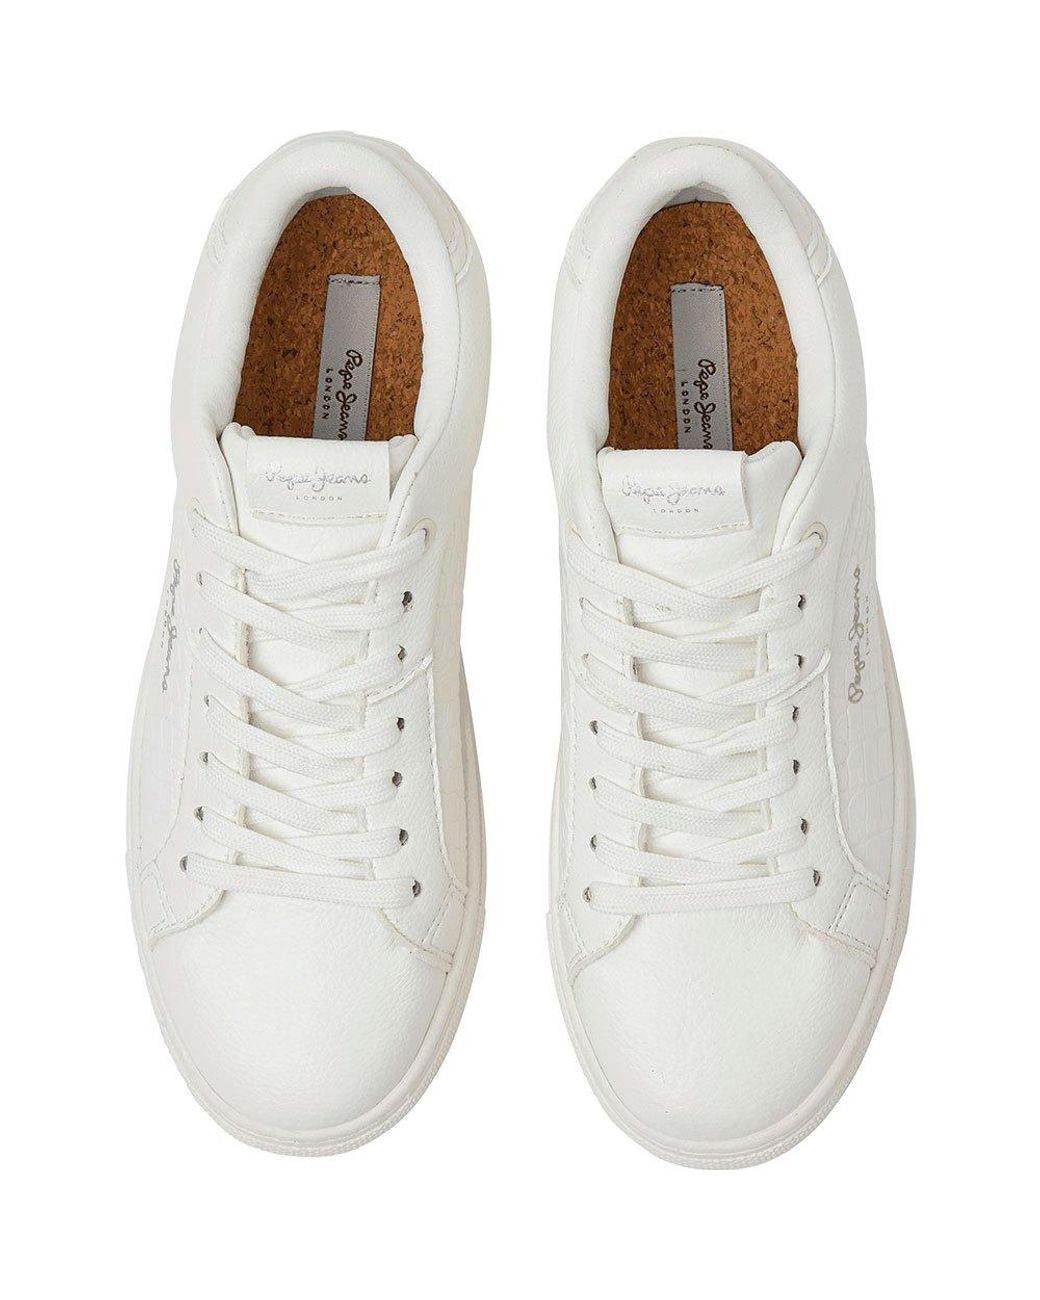 Pepe Jeans Adams Match Low Trainers in Metallic | Lyst